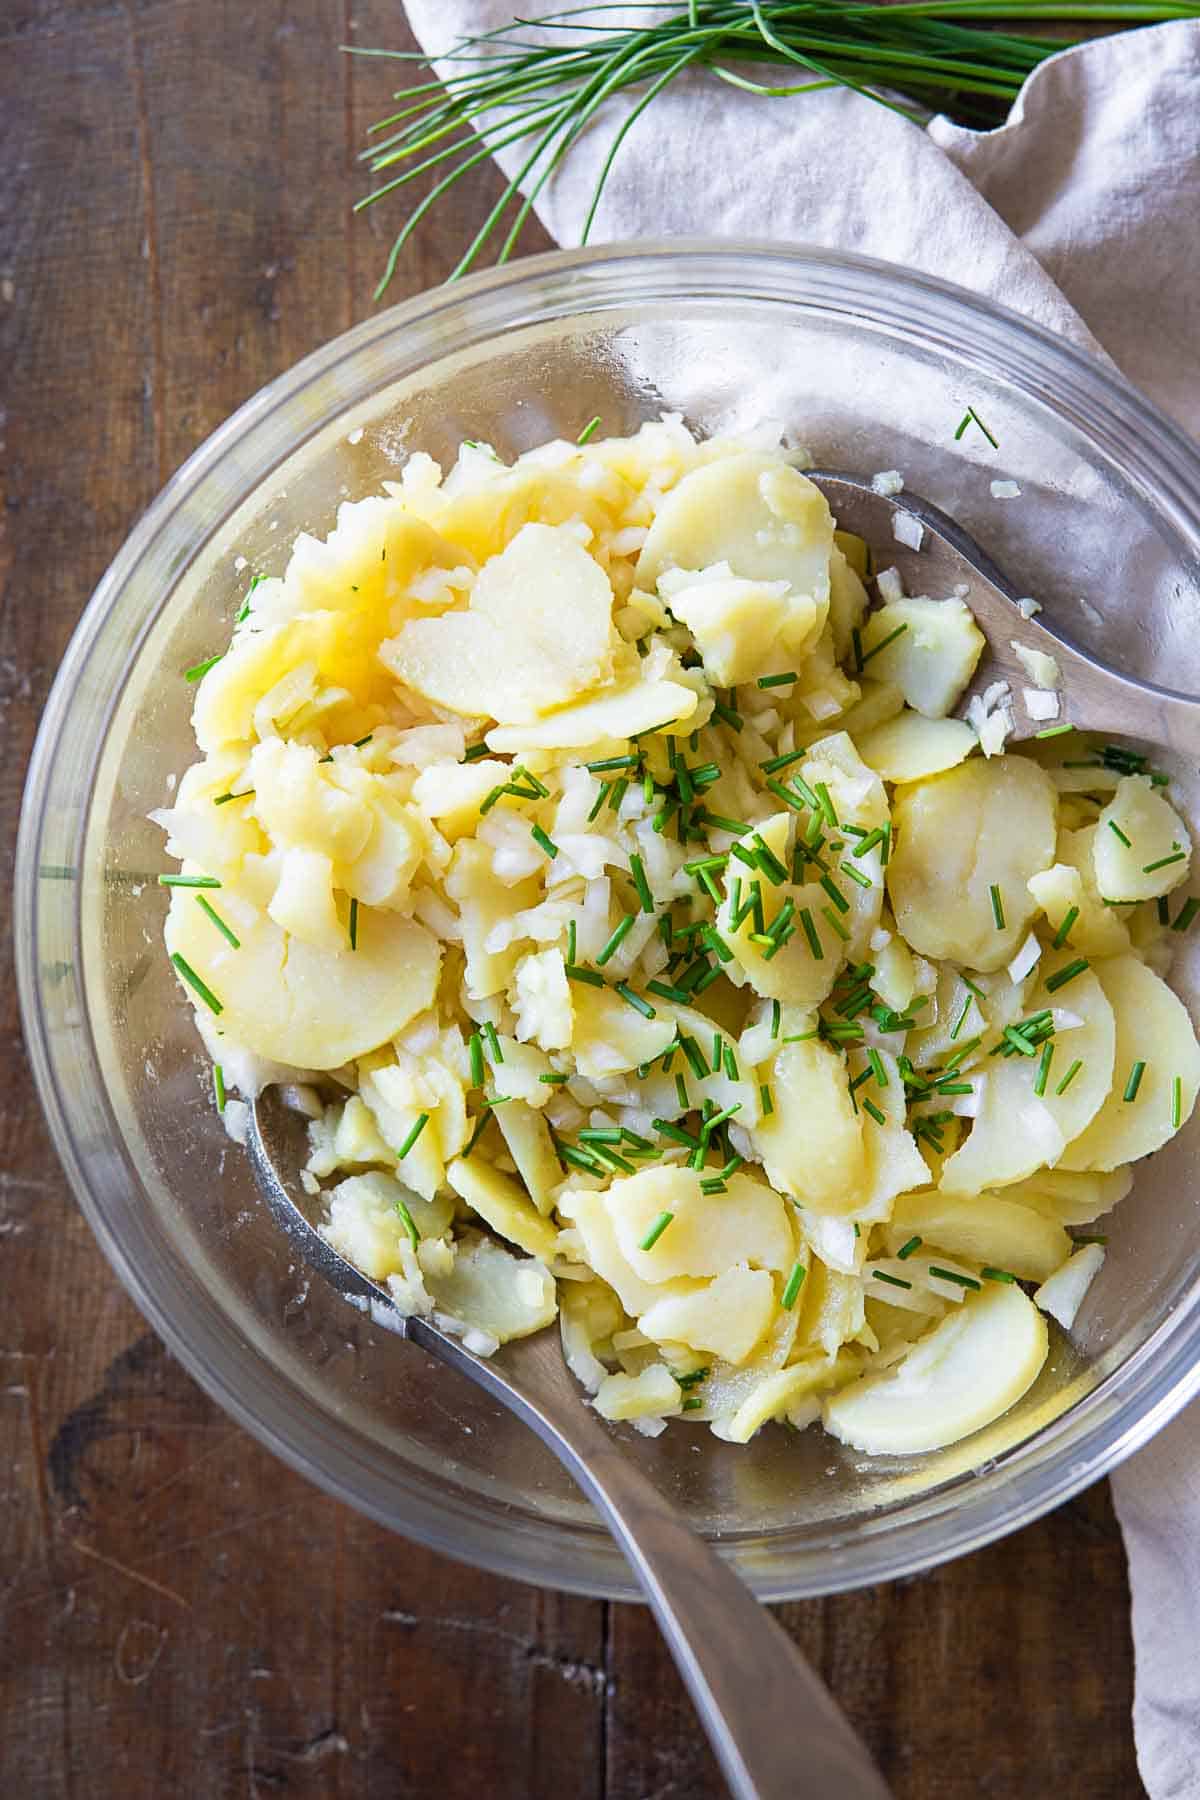 German Potato Salad in a glass salad bowl on a wooden table.